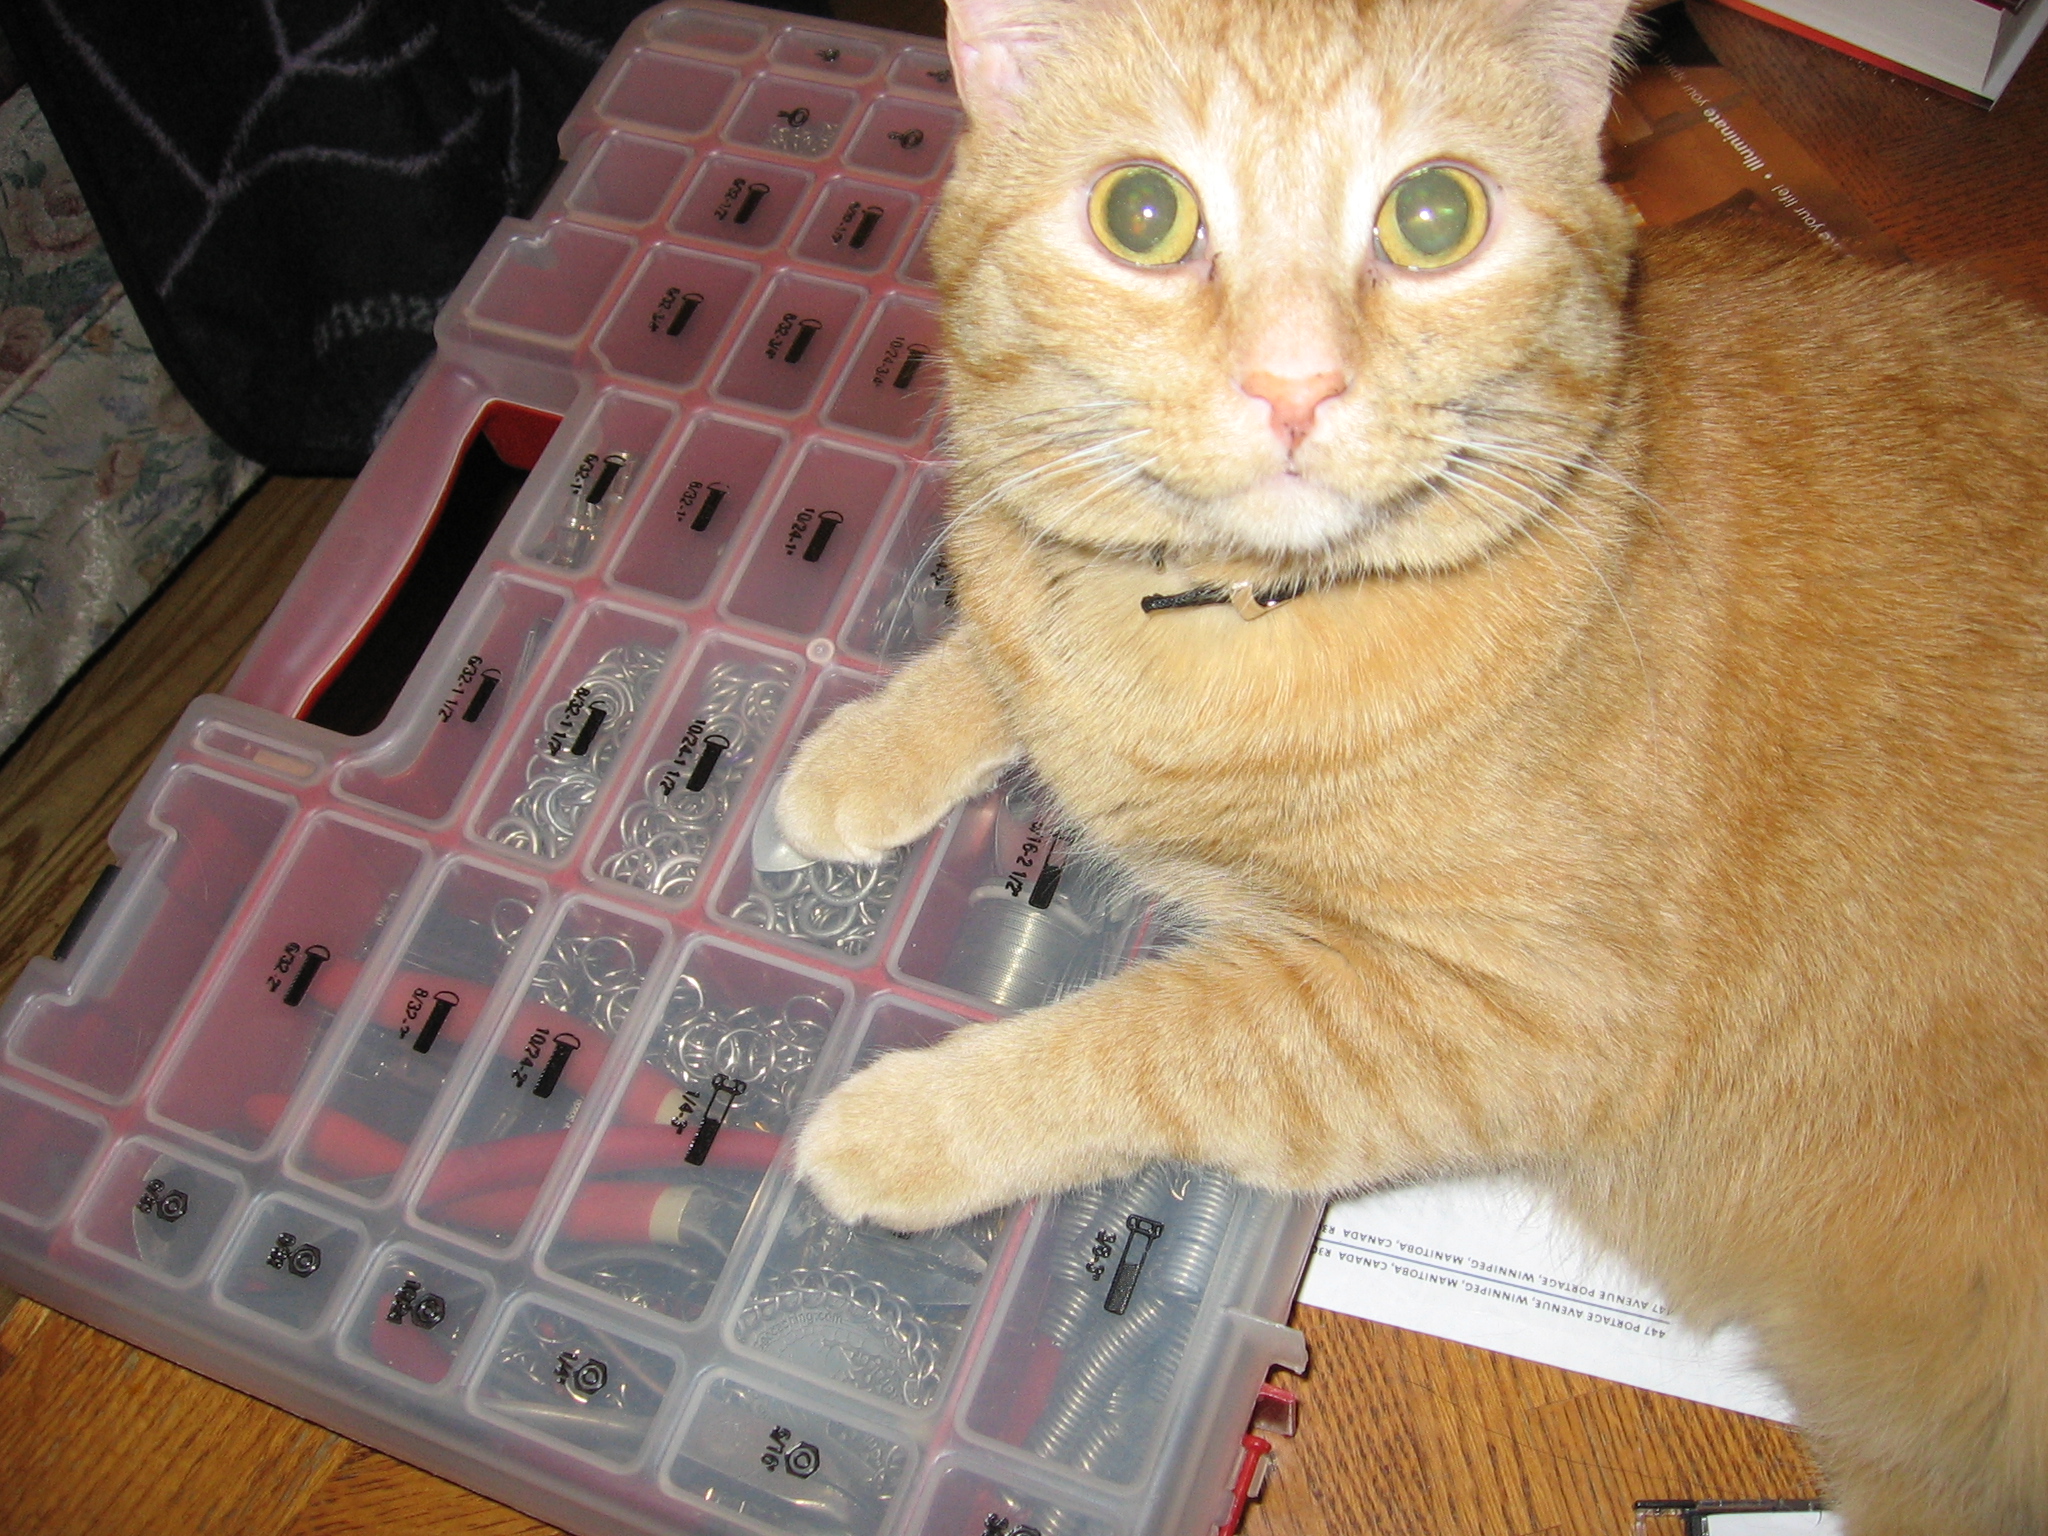 Jack sitting partially on the computer desk, partially on Kabutroid's closed chainmaille supplies kit.